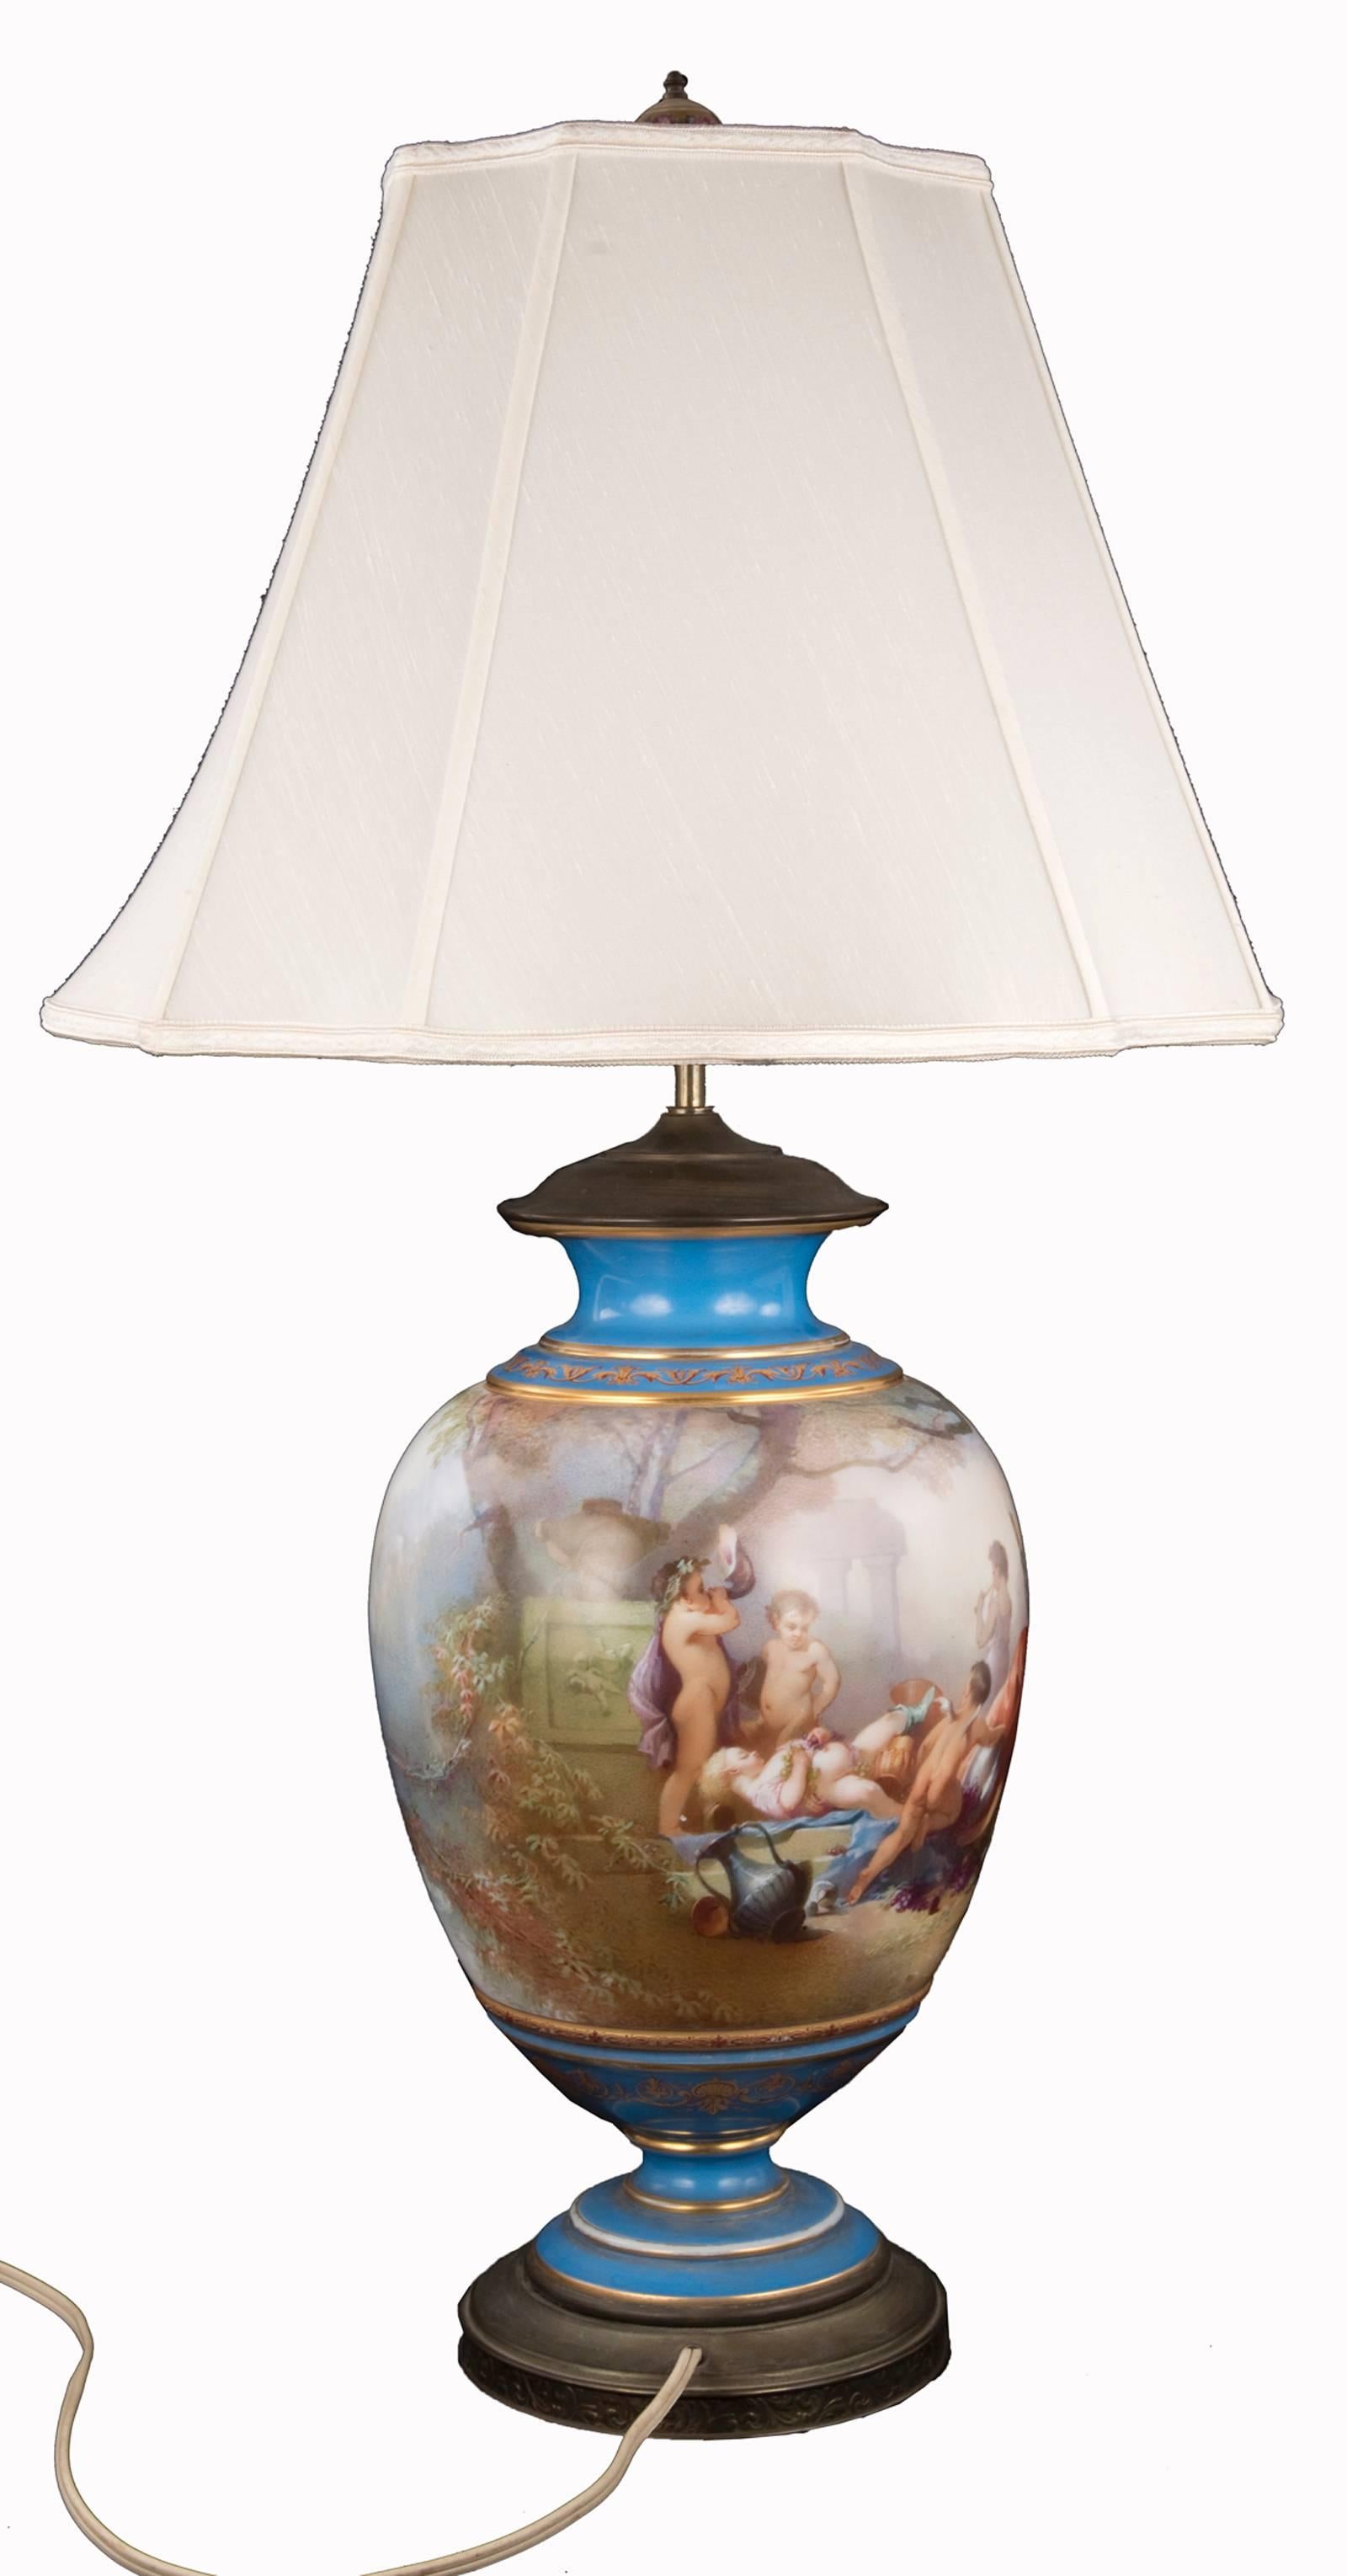 A 19th century lamped vase of baluster form by Sevres. Bacchus and several putti are depicted enjoying jars of wine in a garden setting, surrounded by large architectural elements and urns just visible in the misty environ. Cerulean blue painted